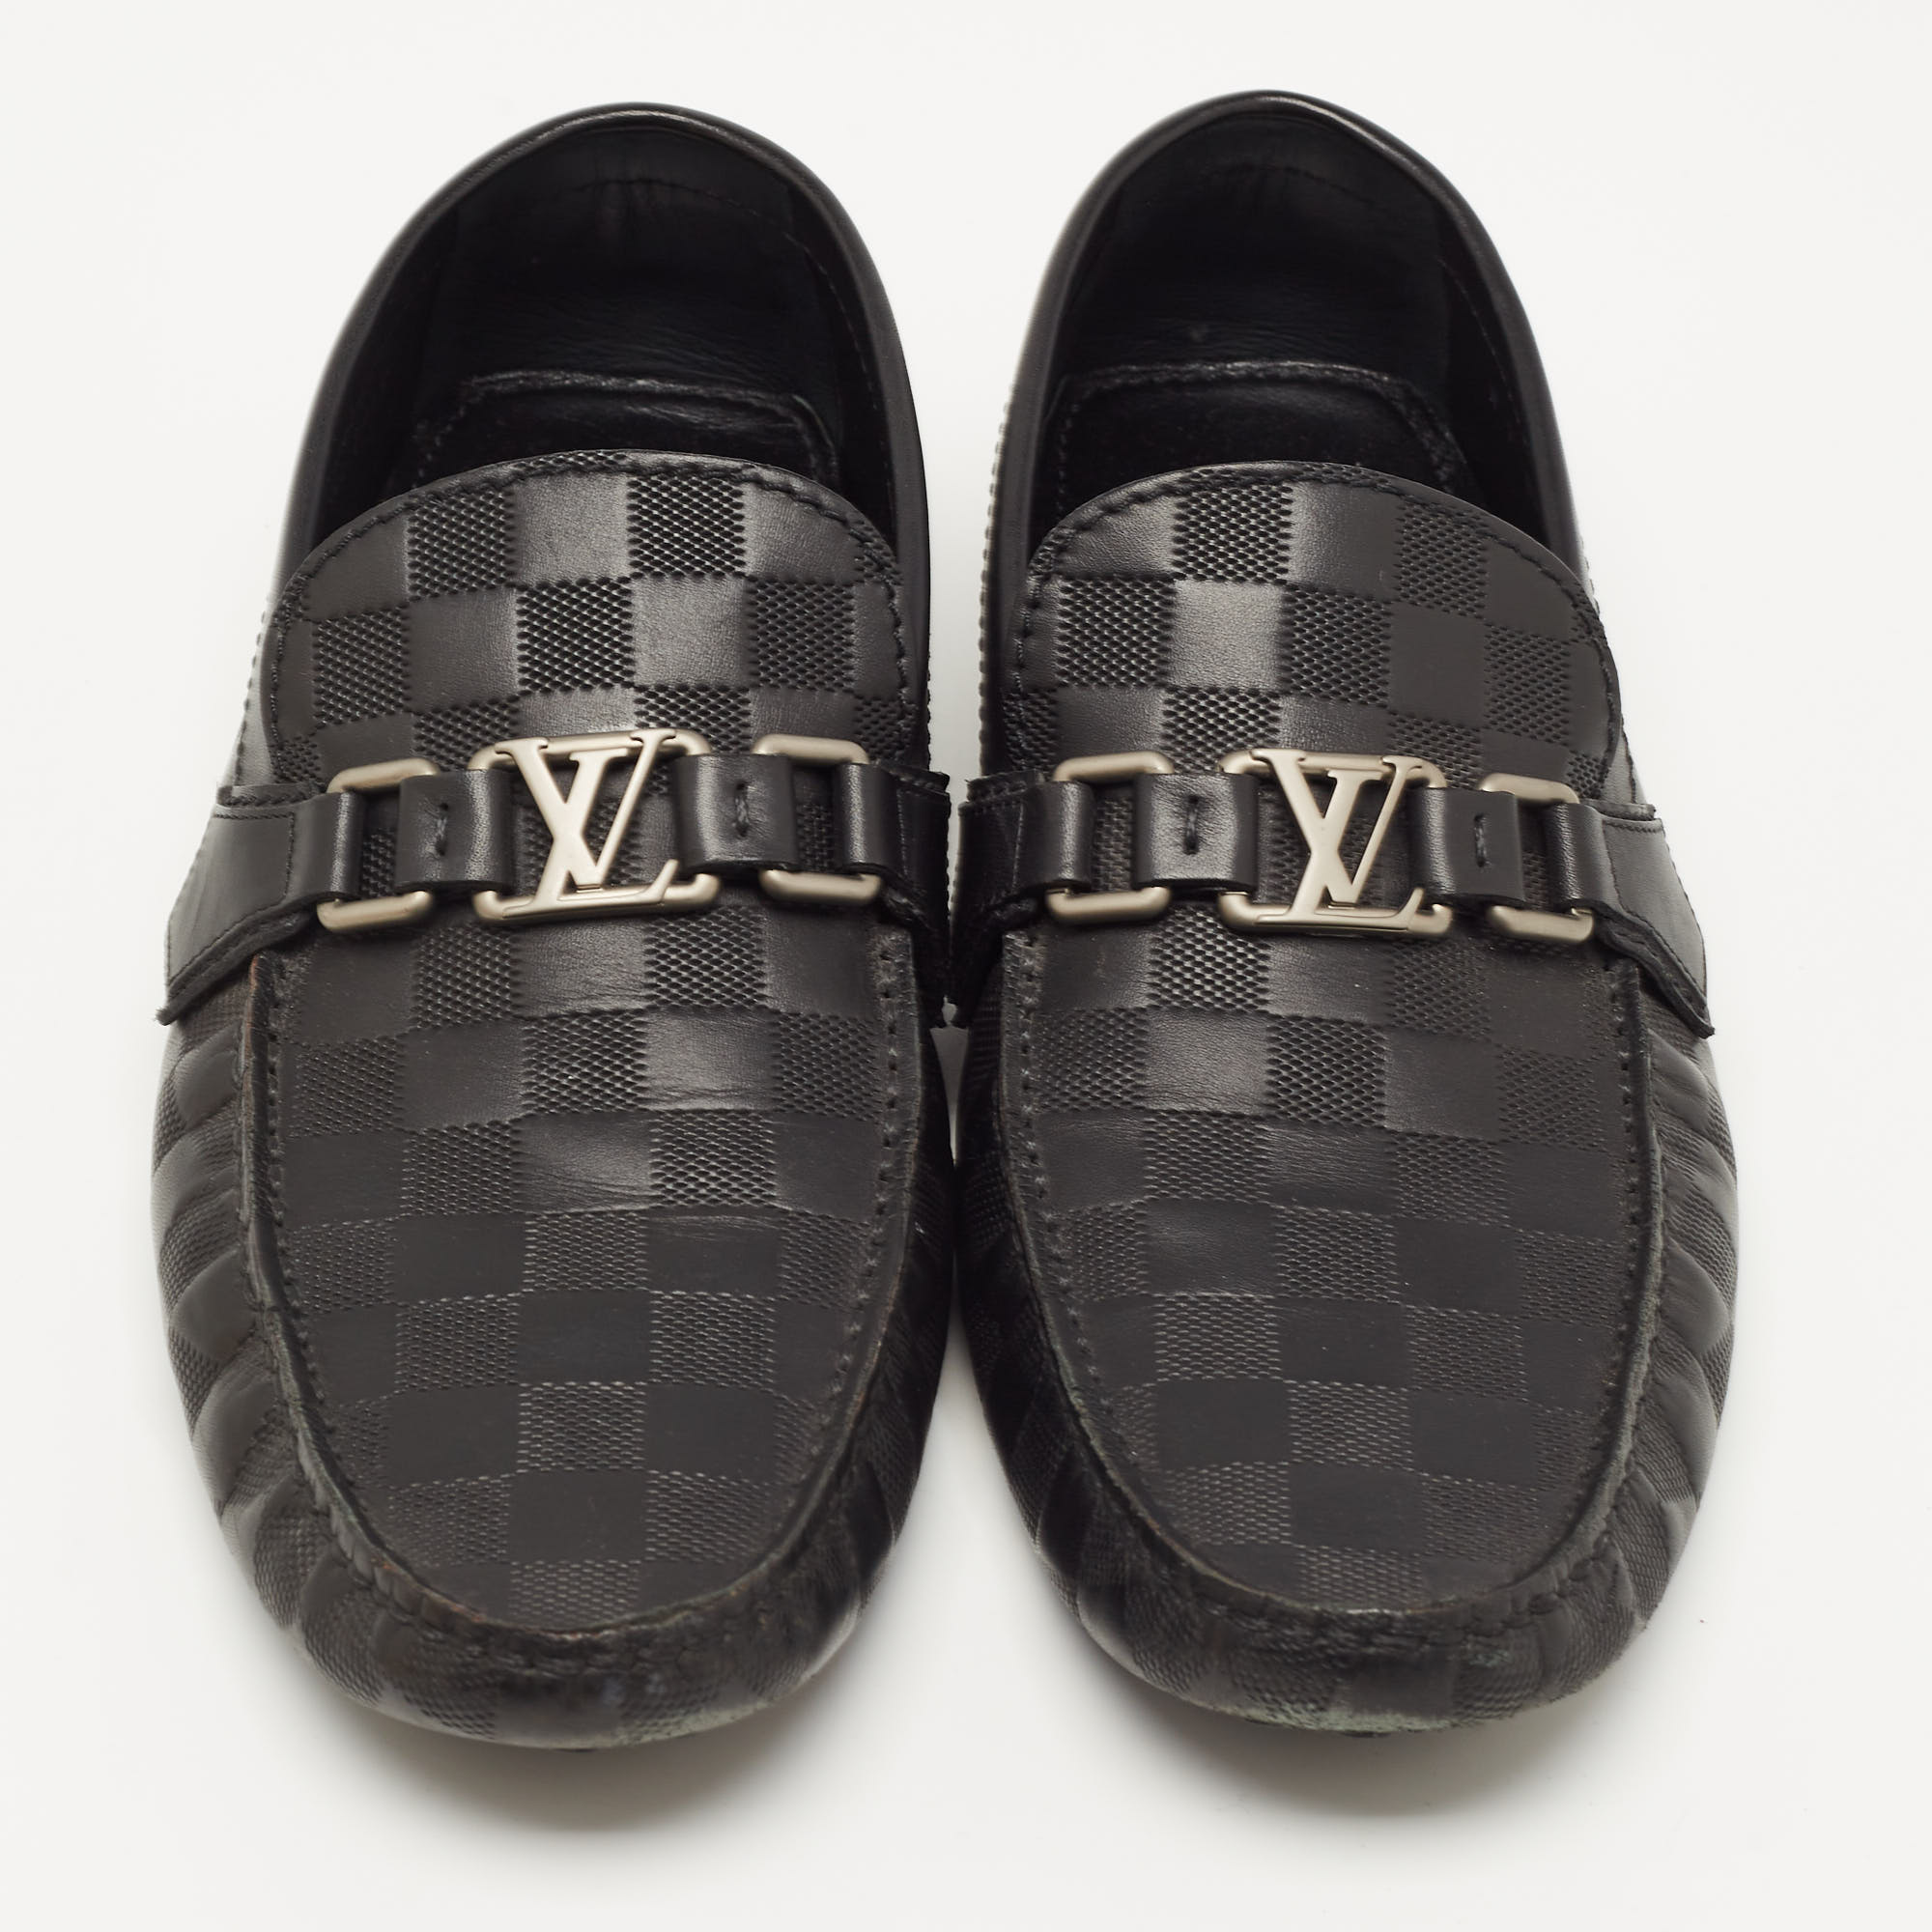 Louis Vuitton Black Damier Embossed Leather Hockenheim Loafers Size 43